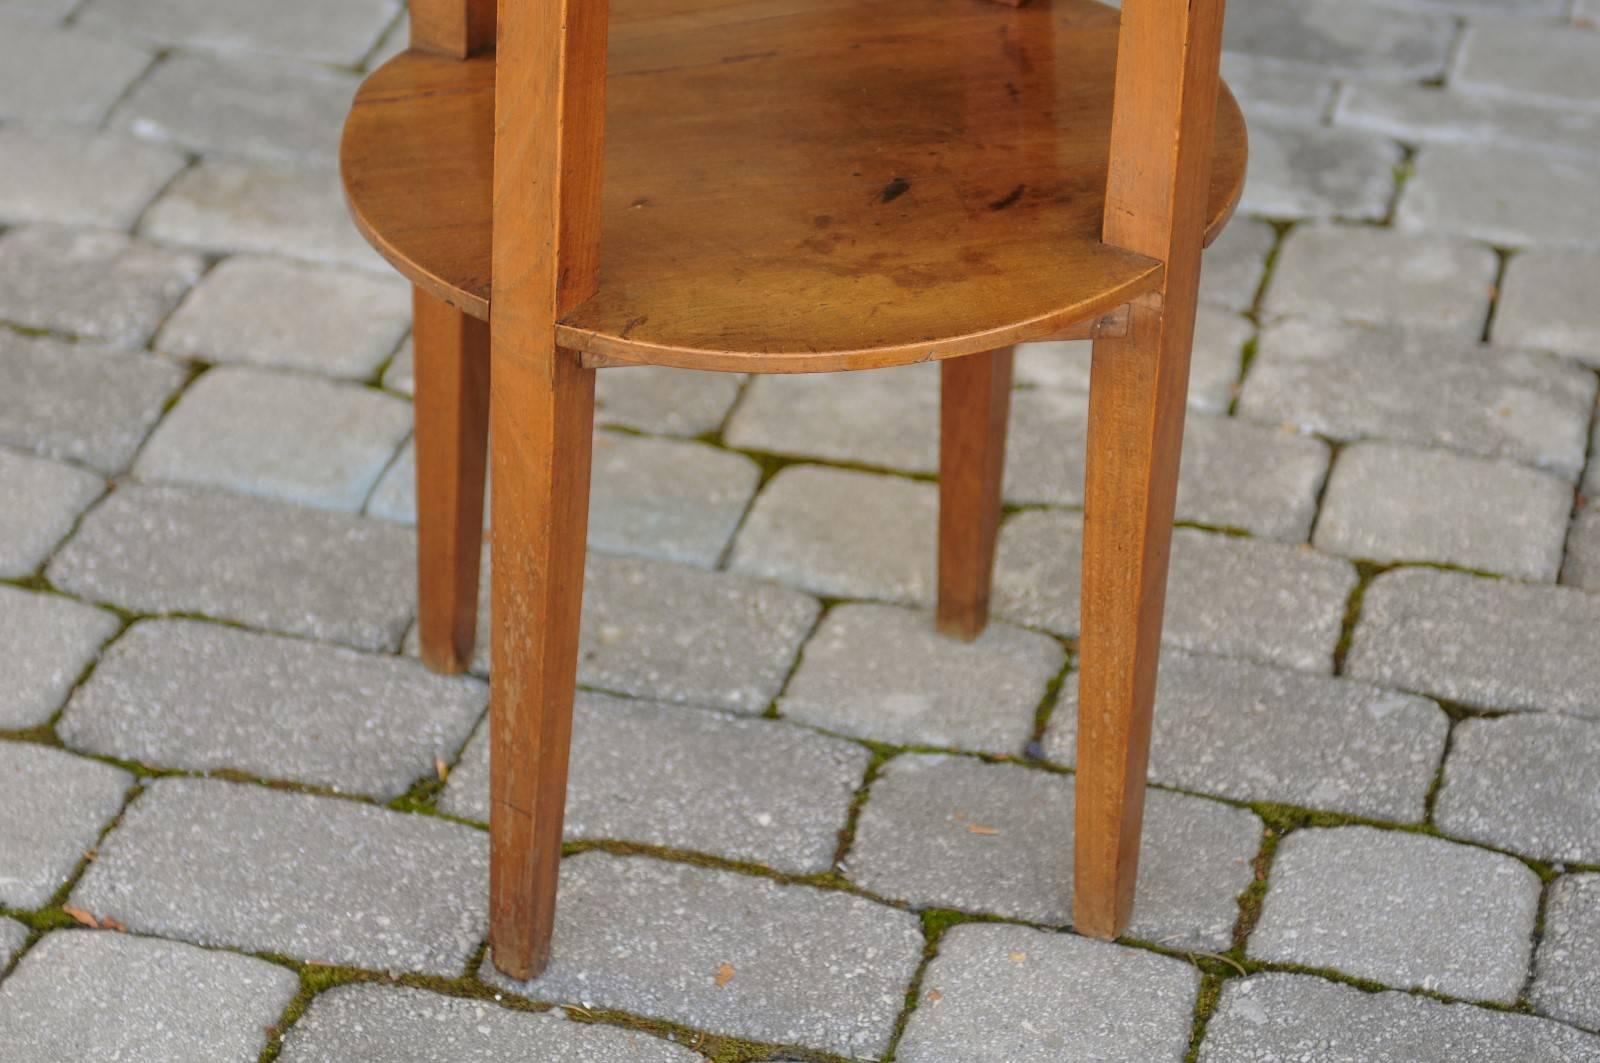 Wood French Circular Side Table with Single Drawer and Lower Shelf from the 1840s